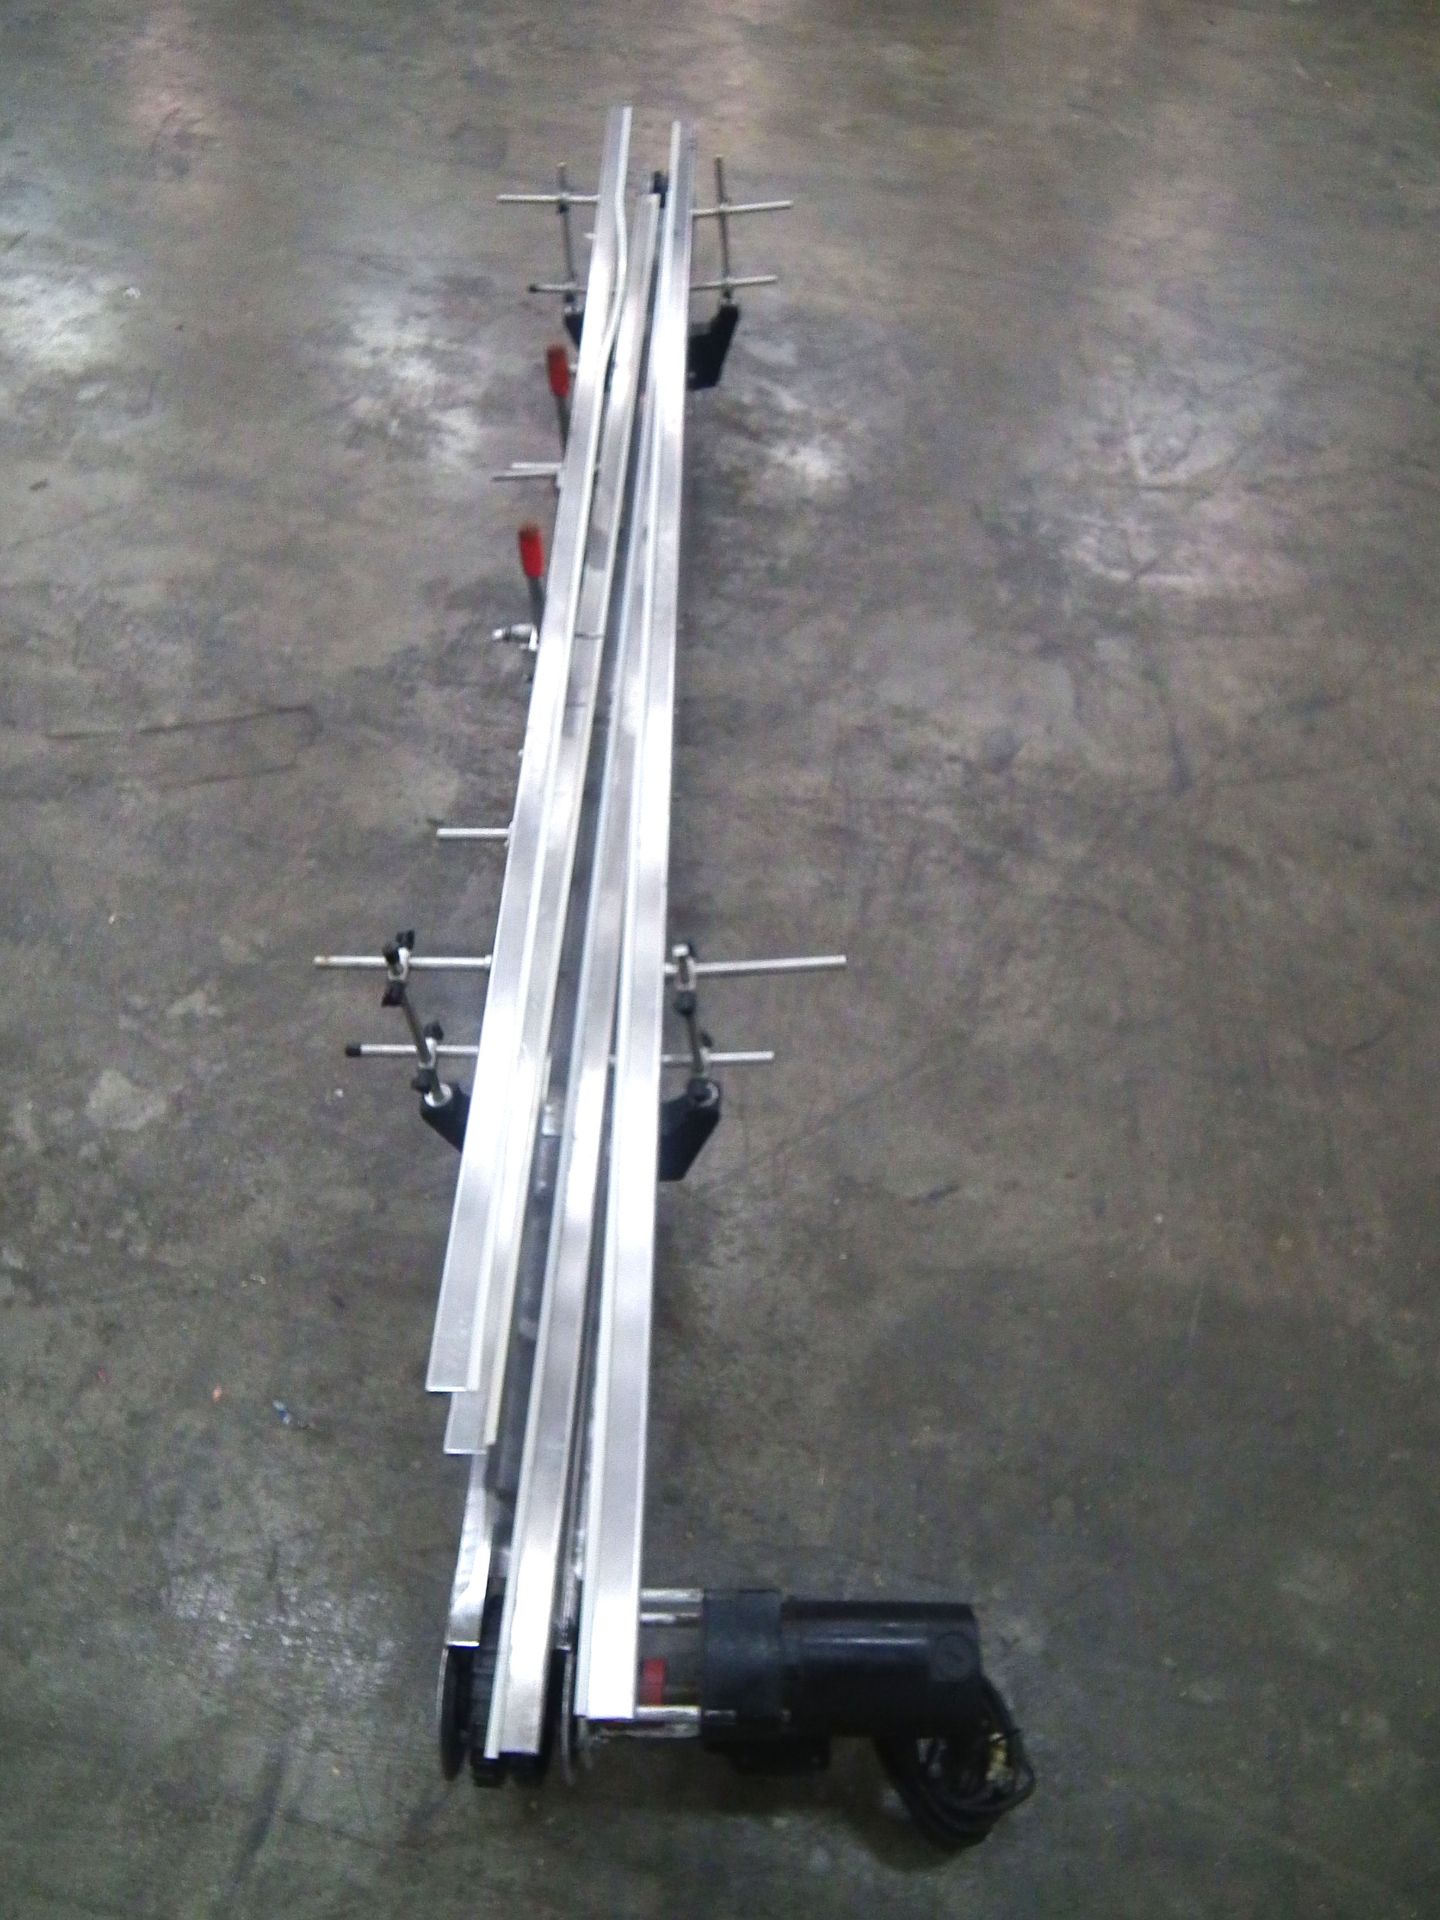 10' L x 4" W Stainless Steel Table Top Conveyor B2689 - Image 6 of 6